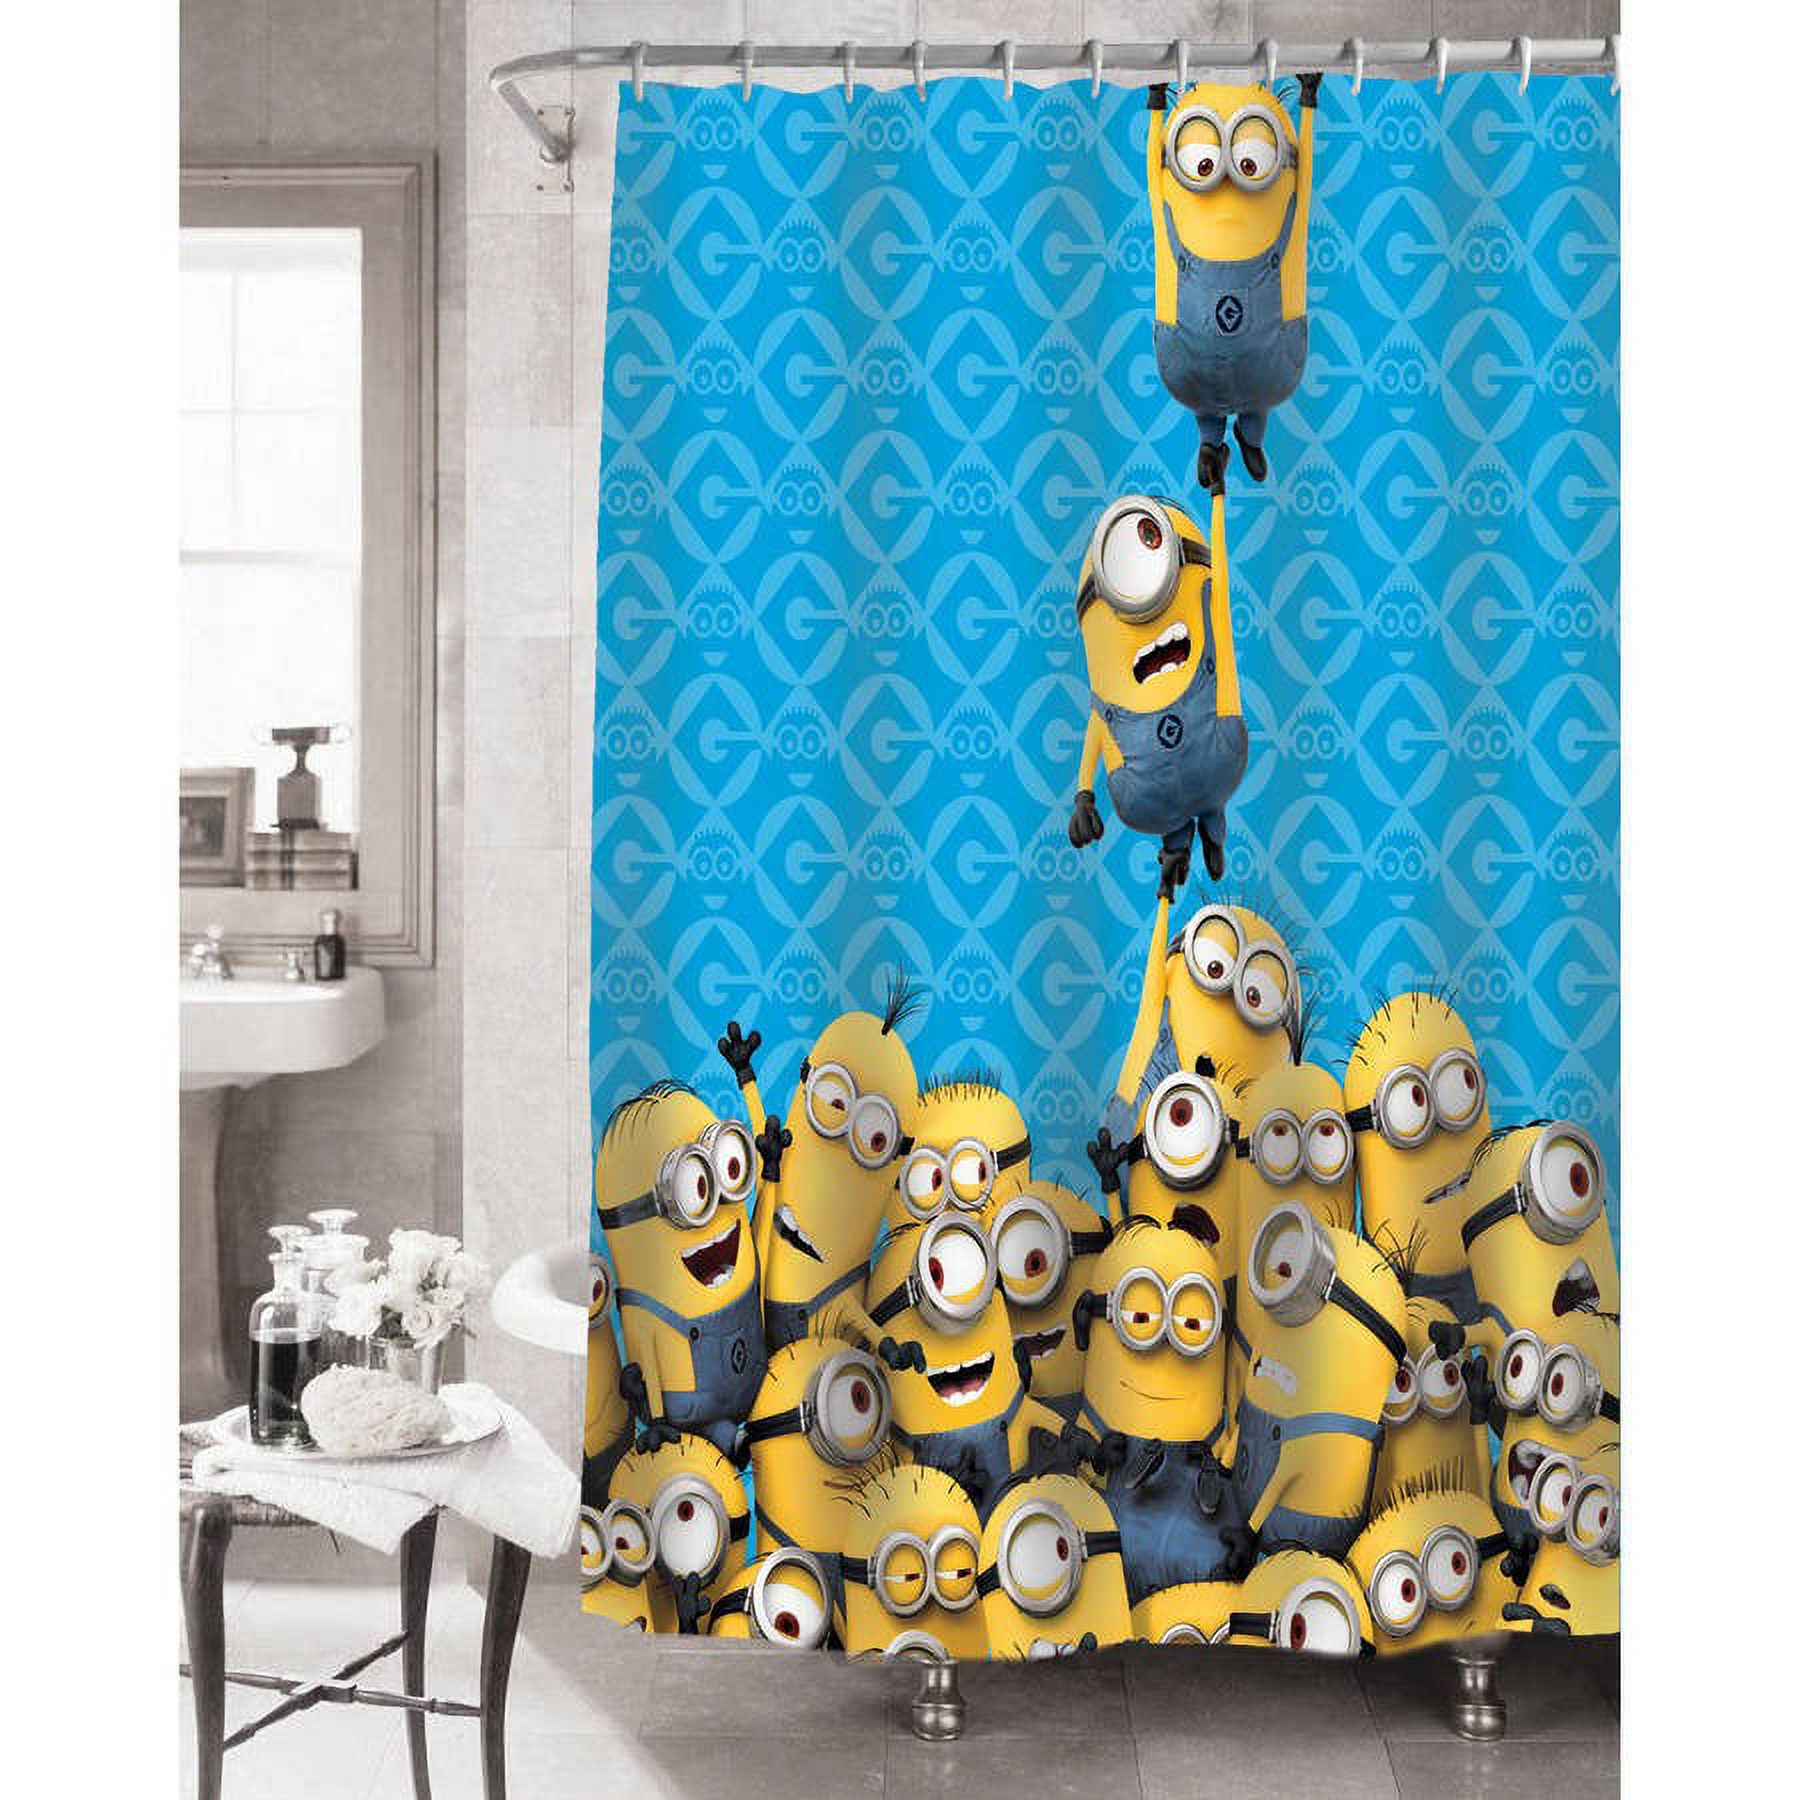 Minions Fabric Shower Curtain, 72 x 72 - image 1 of 2